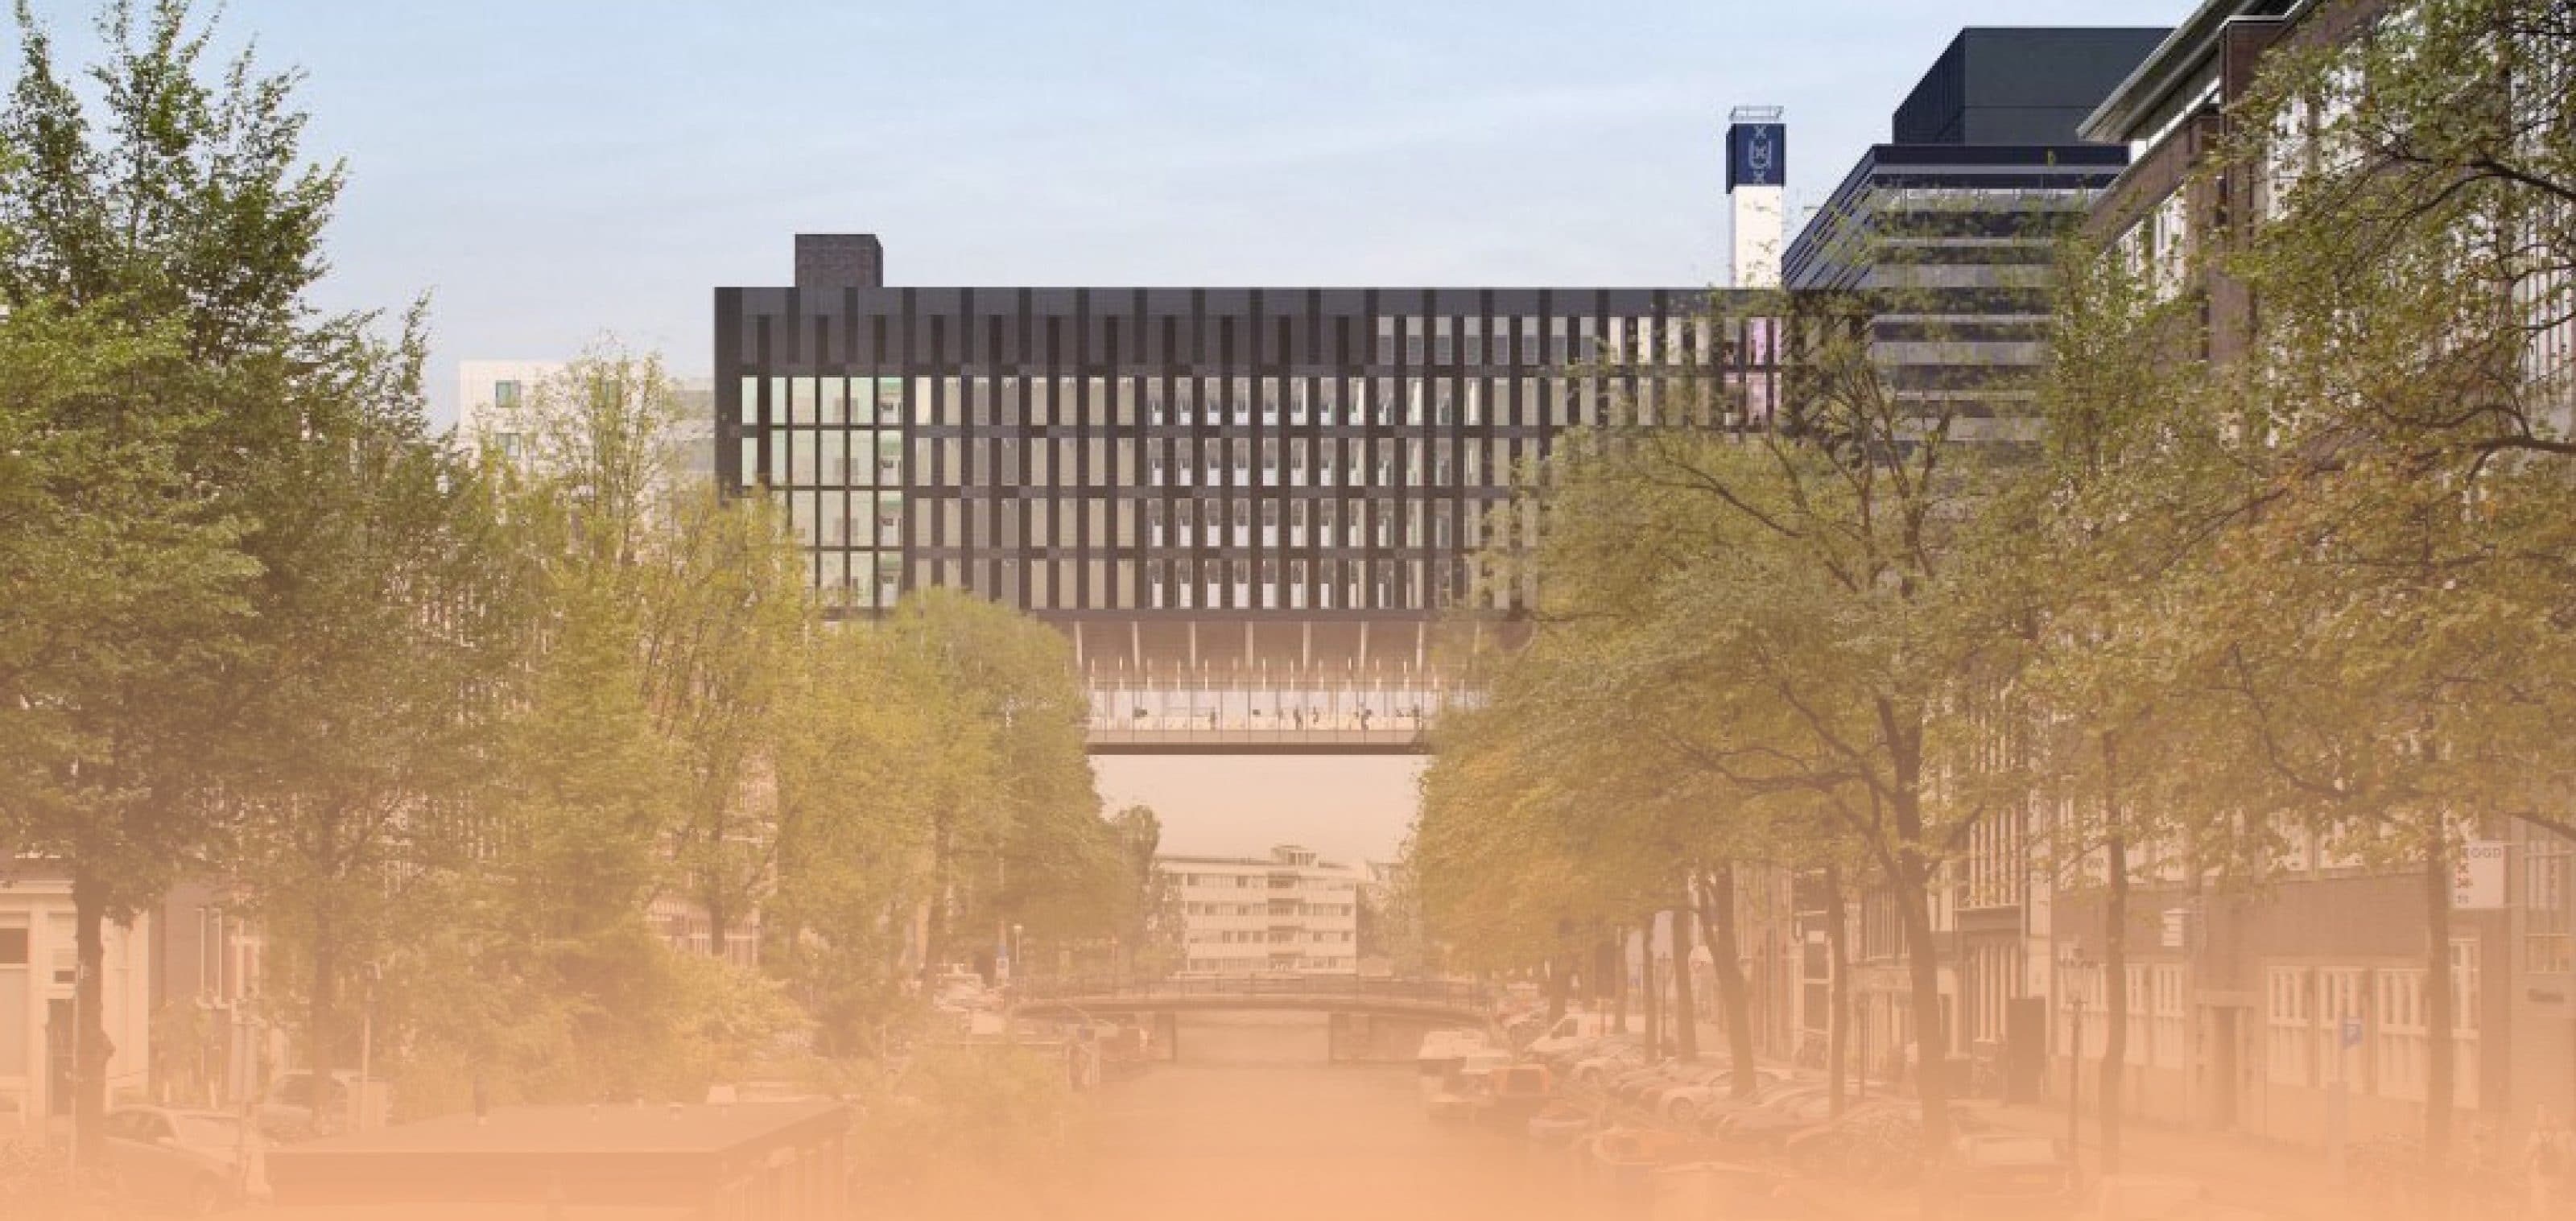 University of Amsterdam Faculty of Economics and Business